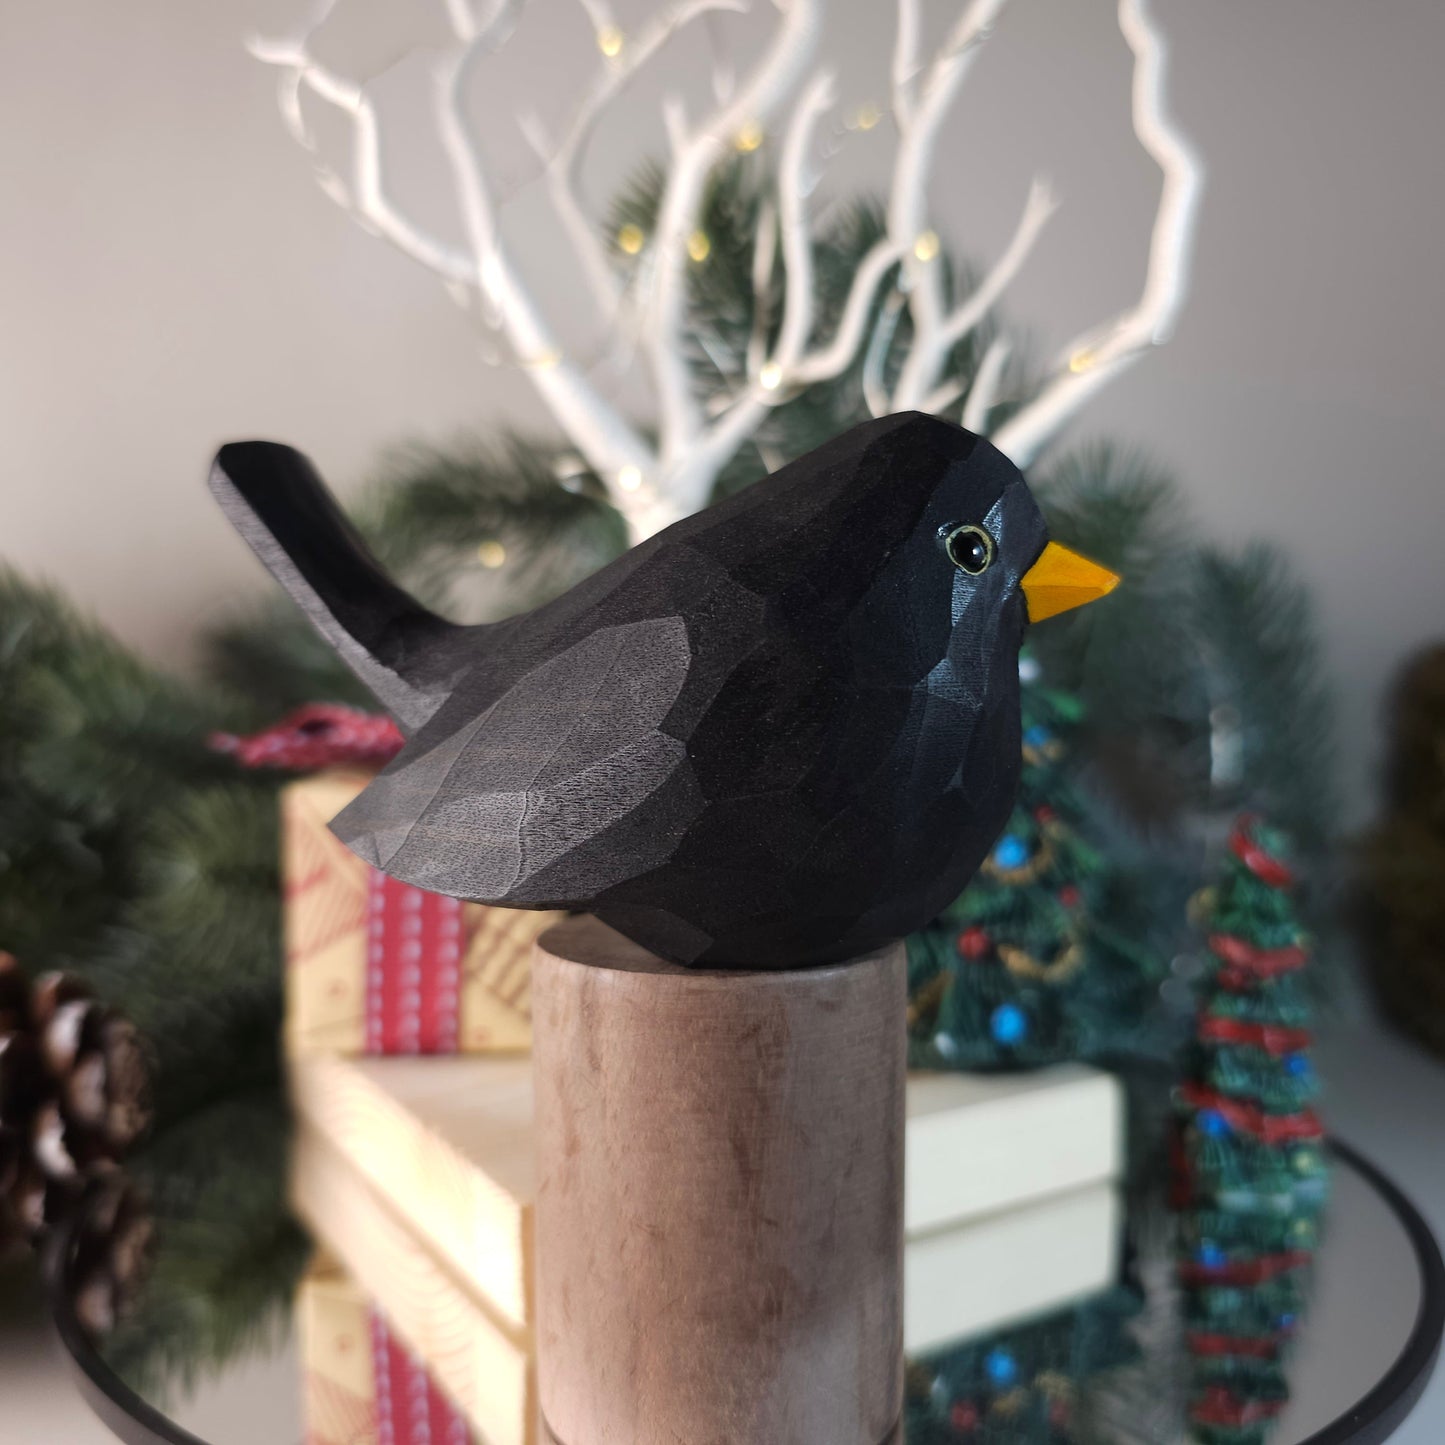 Artisanal Hand-Sculpted & Hand-Painted Wooden Blackbird Figurine - A Touch of Nature's Majesty - PAINTED BIRD SHOP